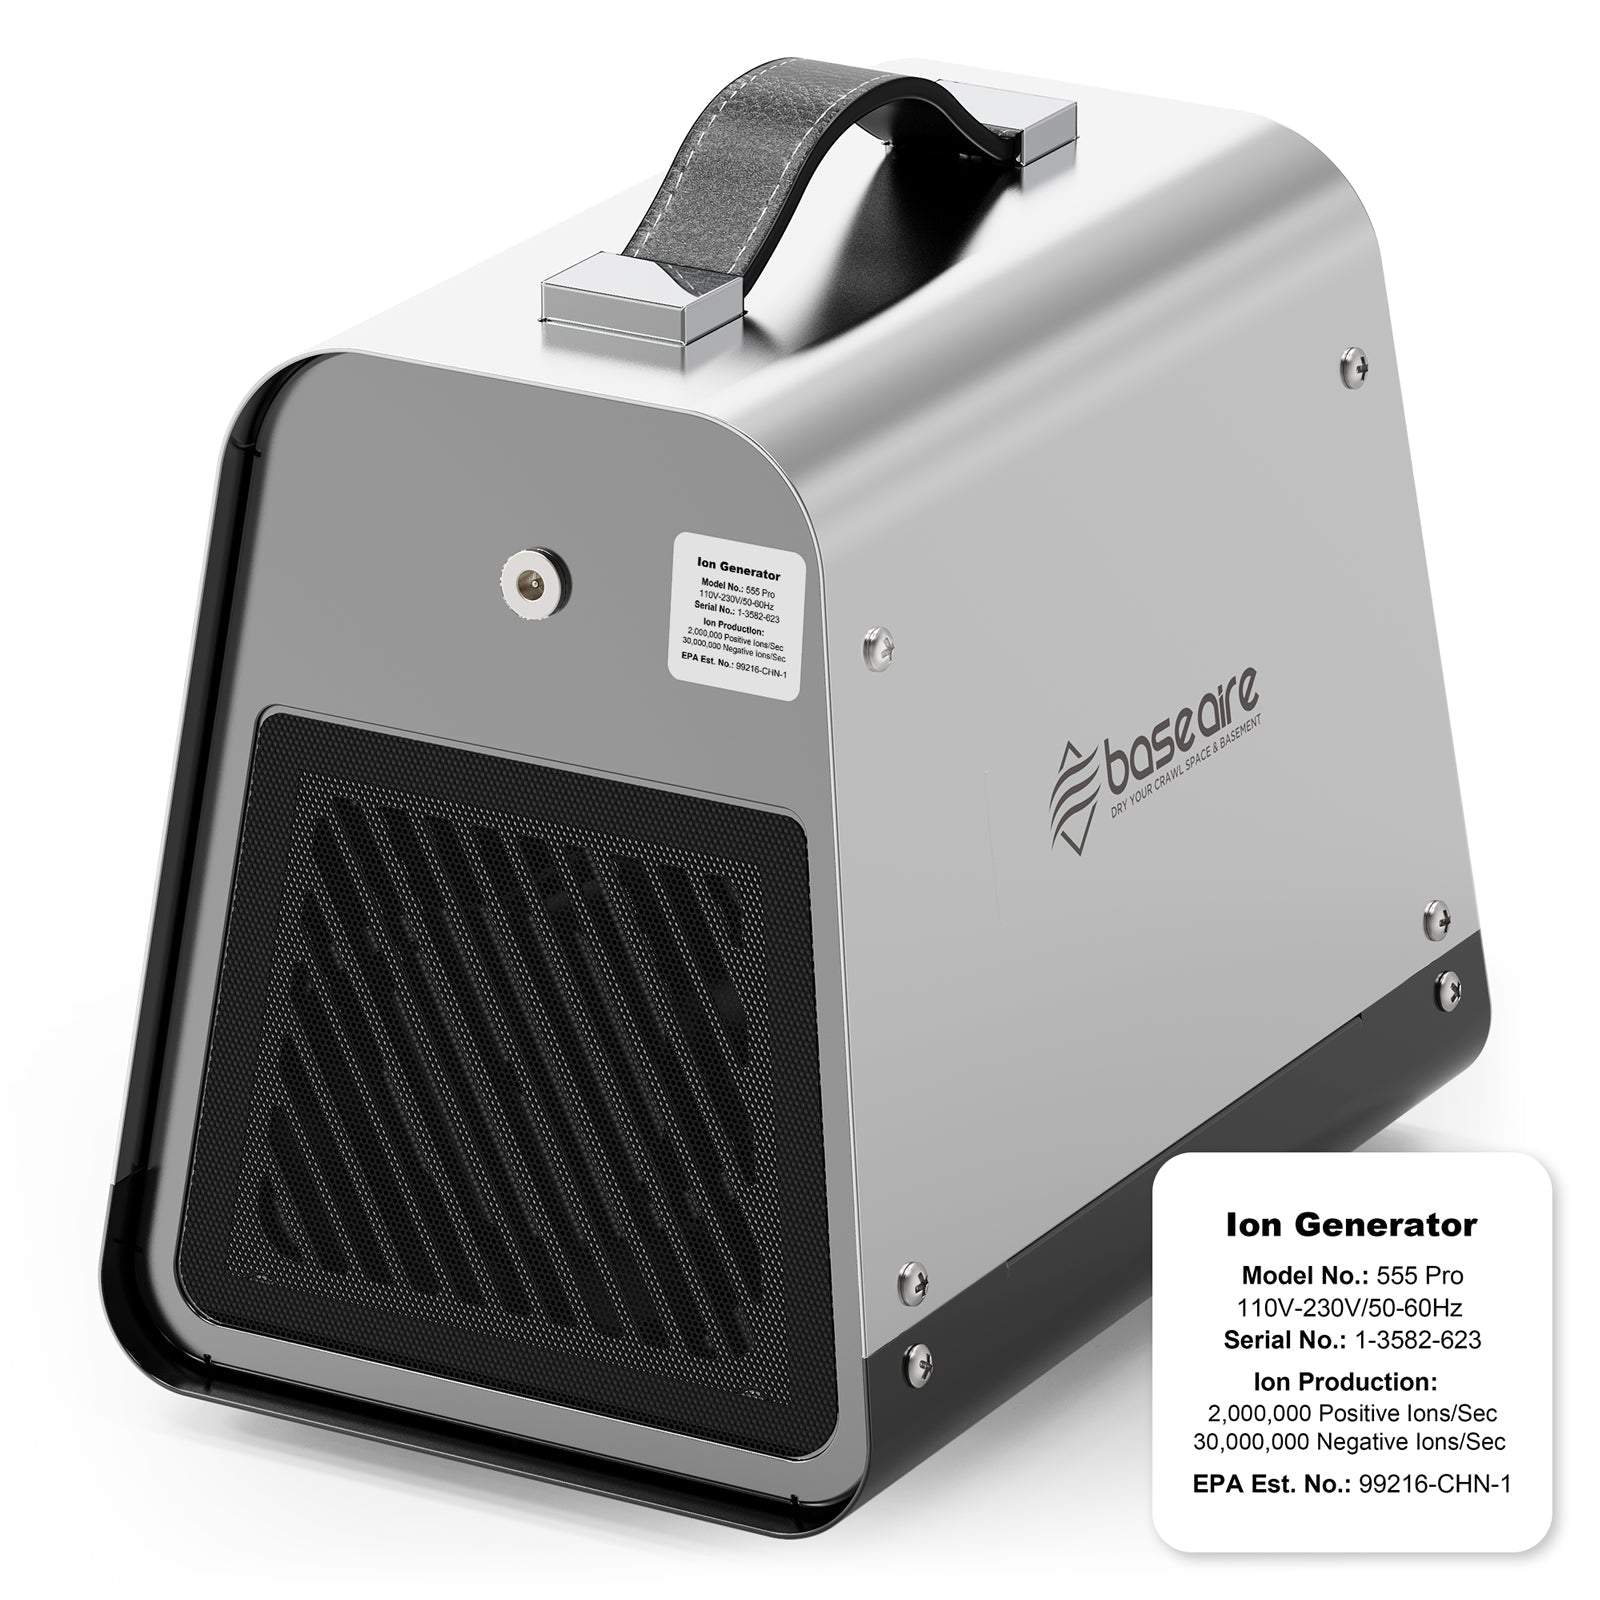 BaseAire 555 Pro Ion Machine with Highest Output - up to 30 Million Negative Ions/Sec, 2 Million Positive Ions/Sec - Ion Generator from [store] by Baseaire - Air purification, Ion Generator, pest control